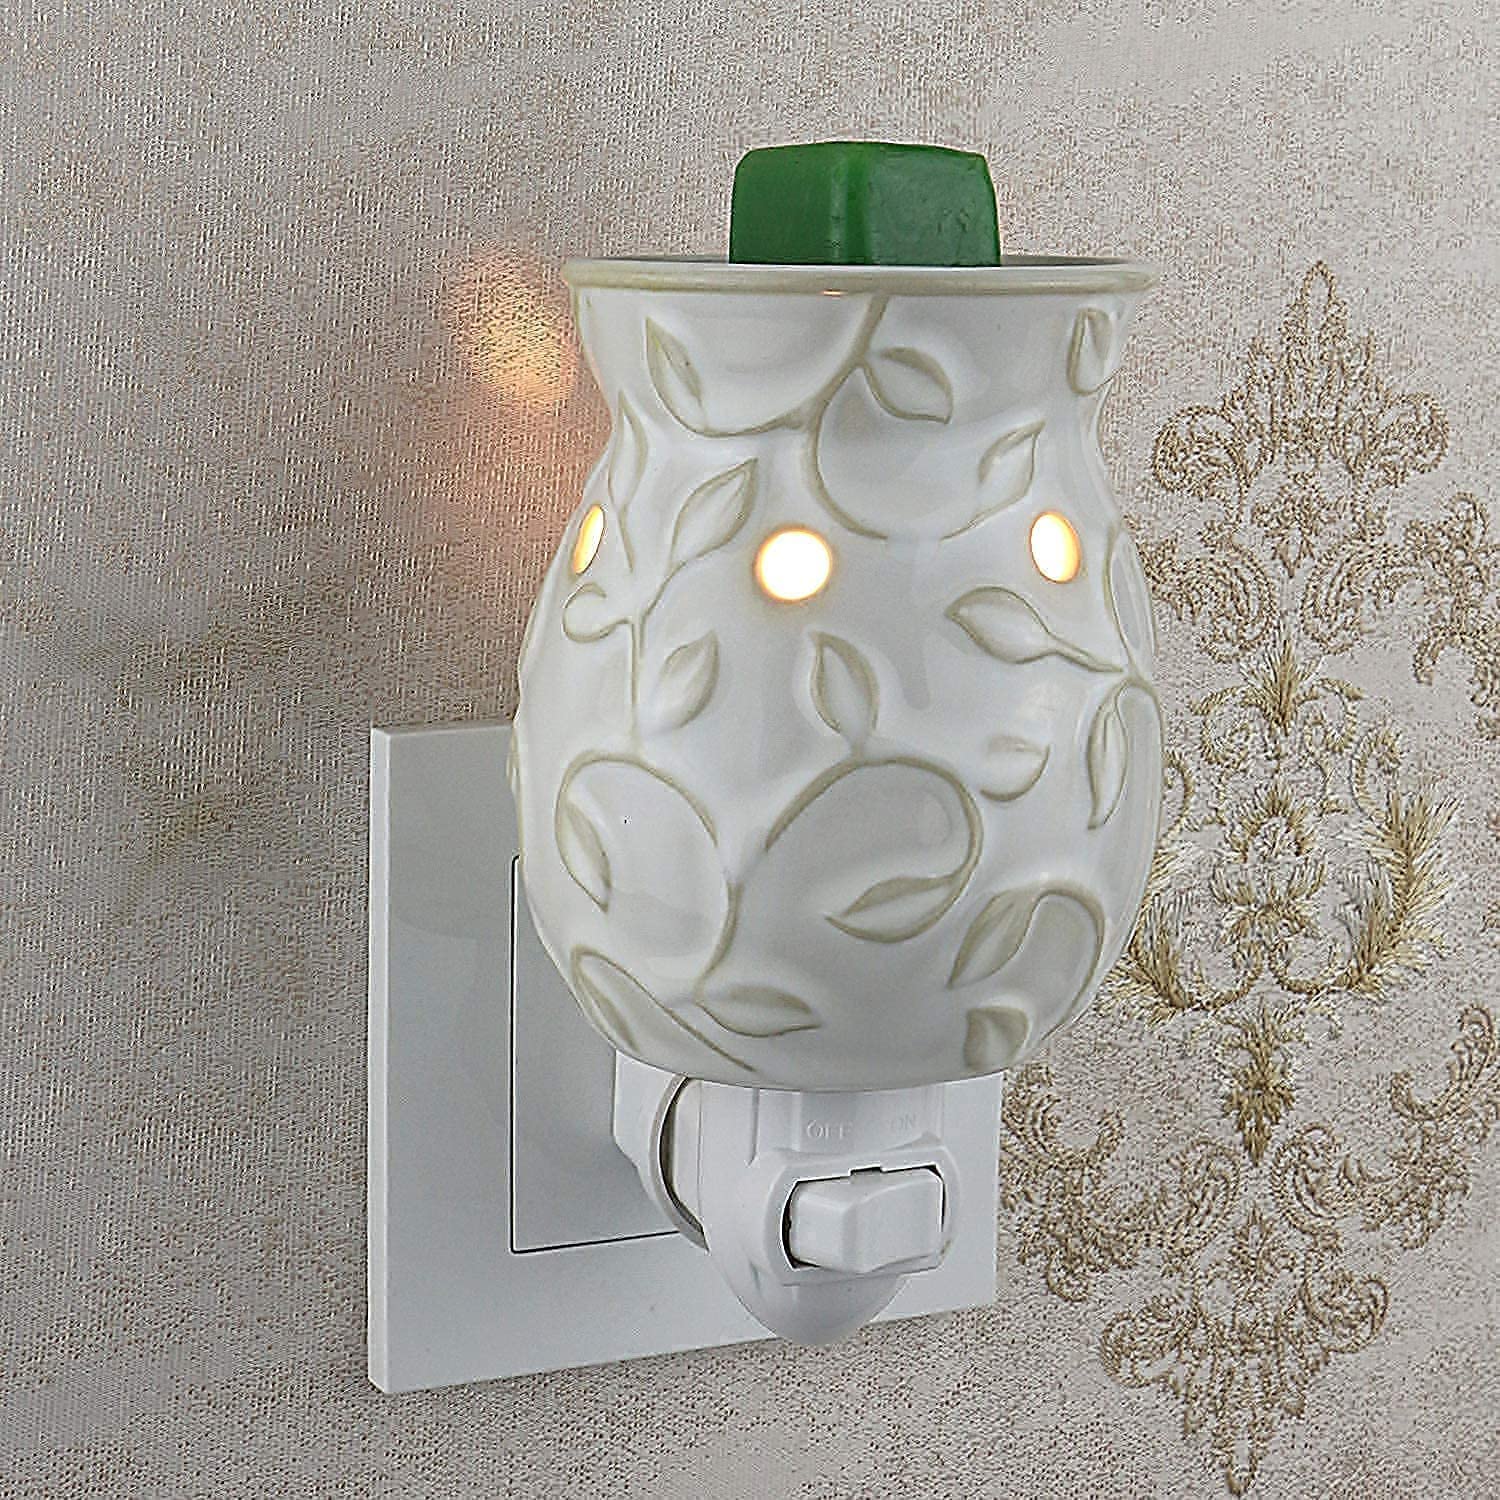 STAR MOON Ceramic Electric Plug in Candle Warmer for Home Dcor, Scentsy Wax  Warmer Candle Melter Burner, Ivy 